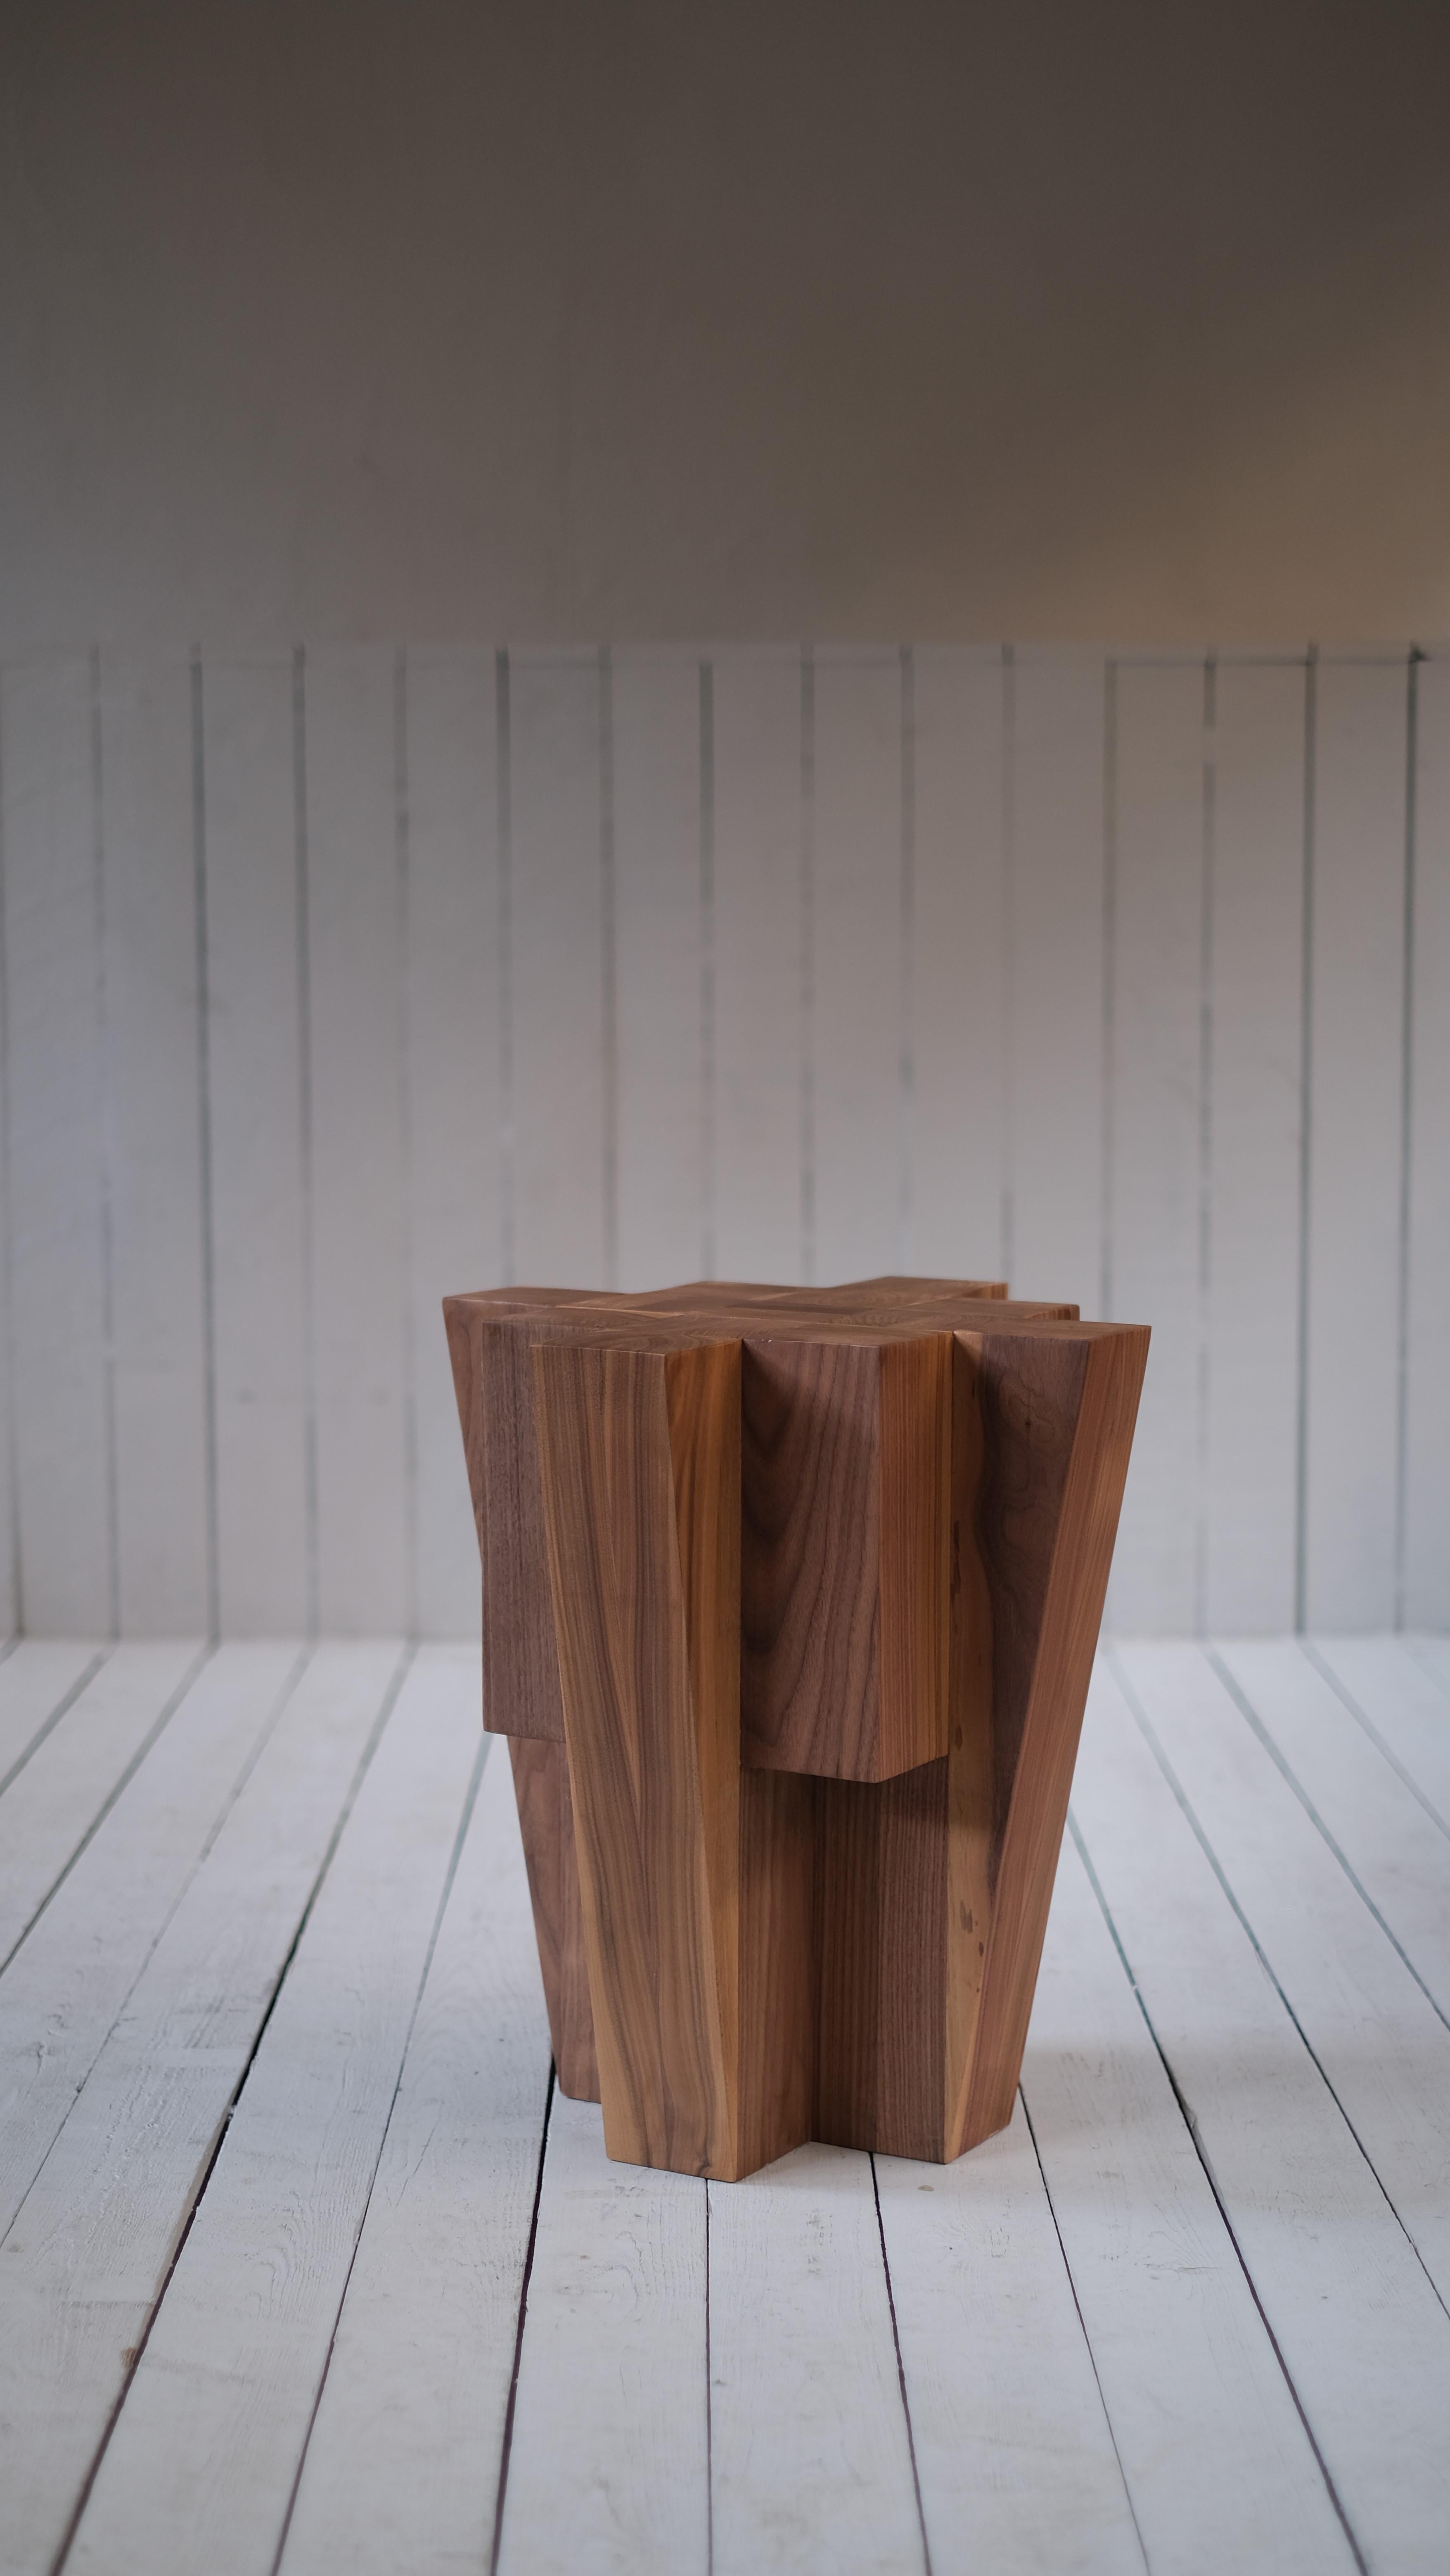 Bunker side table American walnut by Arno Declercq
Materials: American walnut.
Measures: 45 cm W x 45 cm D x 50 cm H.

Made by hand
Signed by Arno Declercq

Arno Declercq
Belgian designer and art dealer who makes bespoke objects with passion